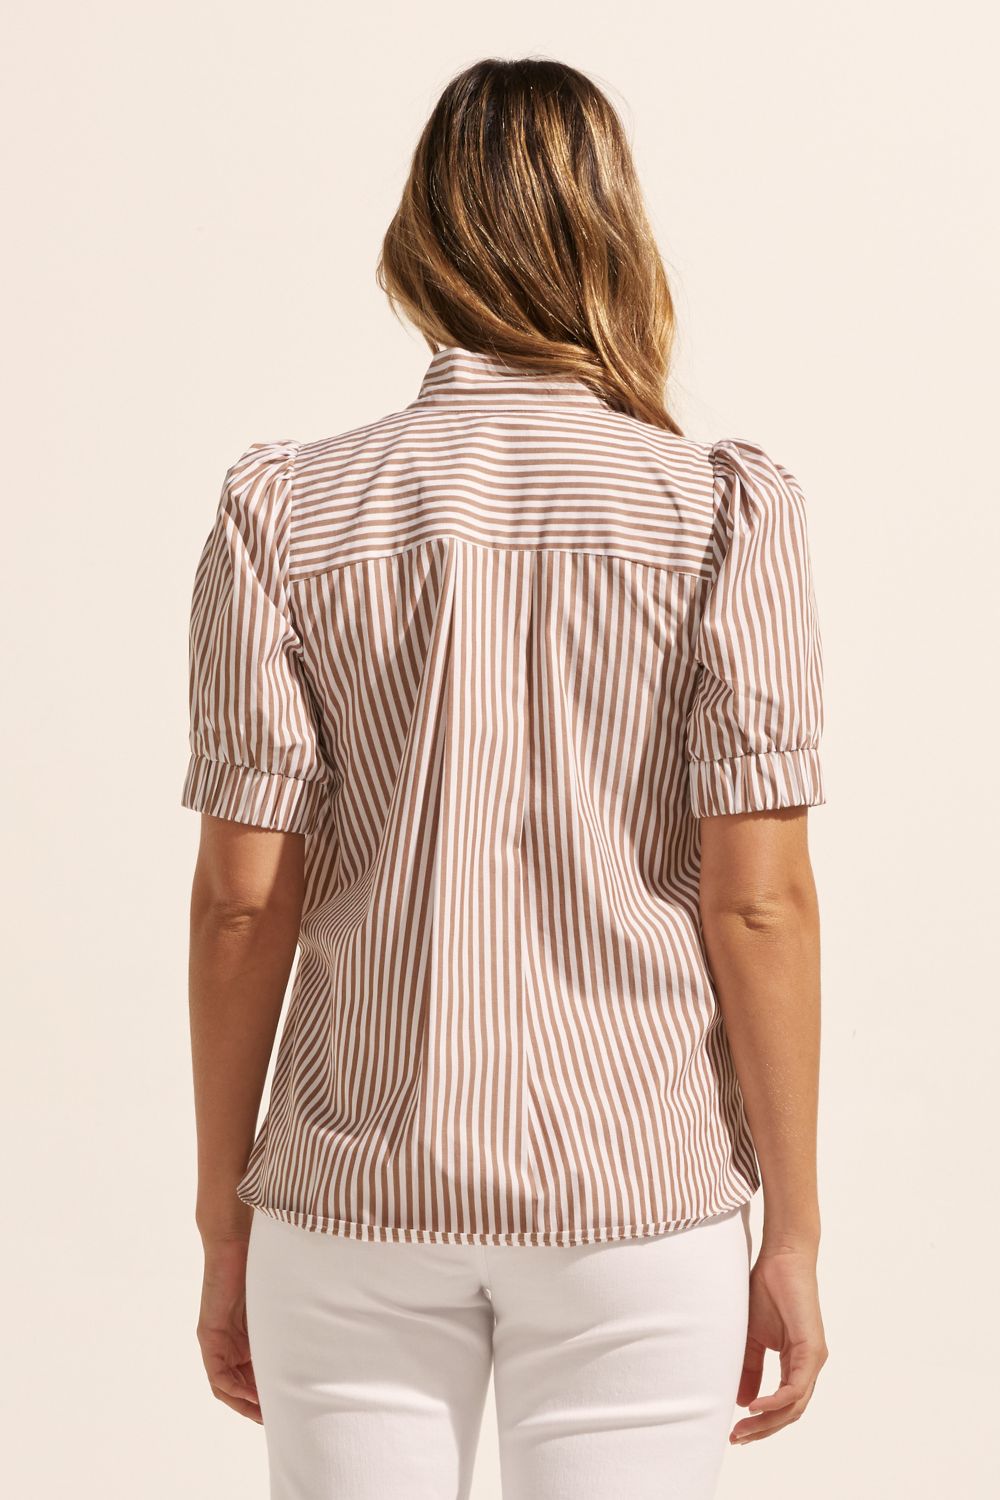 brown stripe, high neck, button up shirt, top, back view